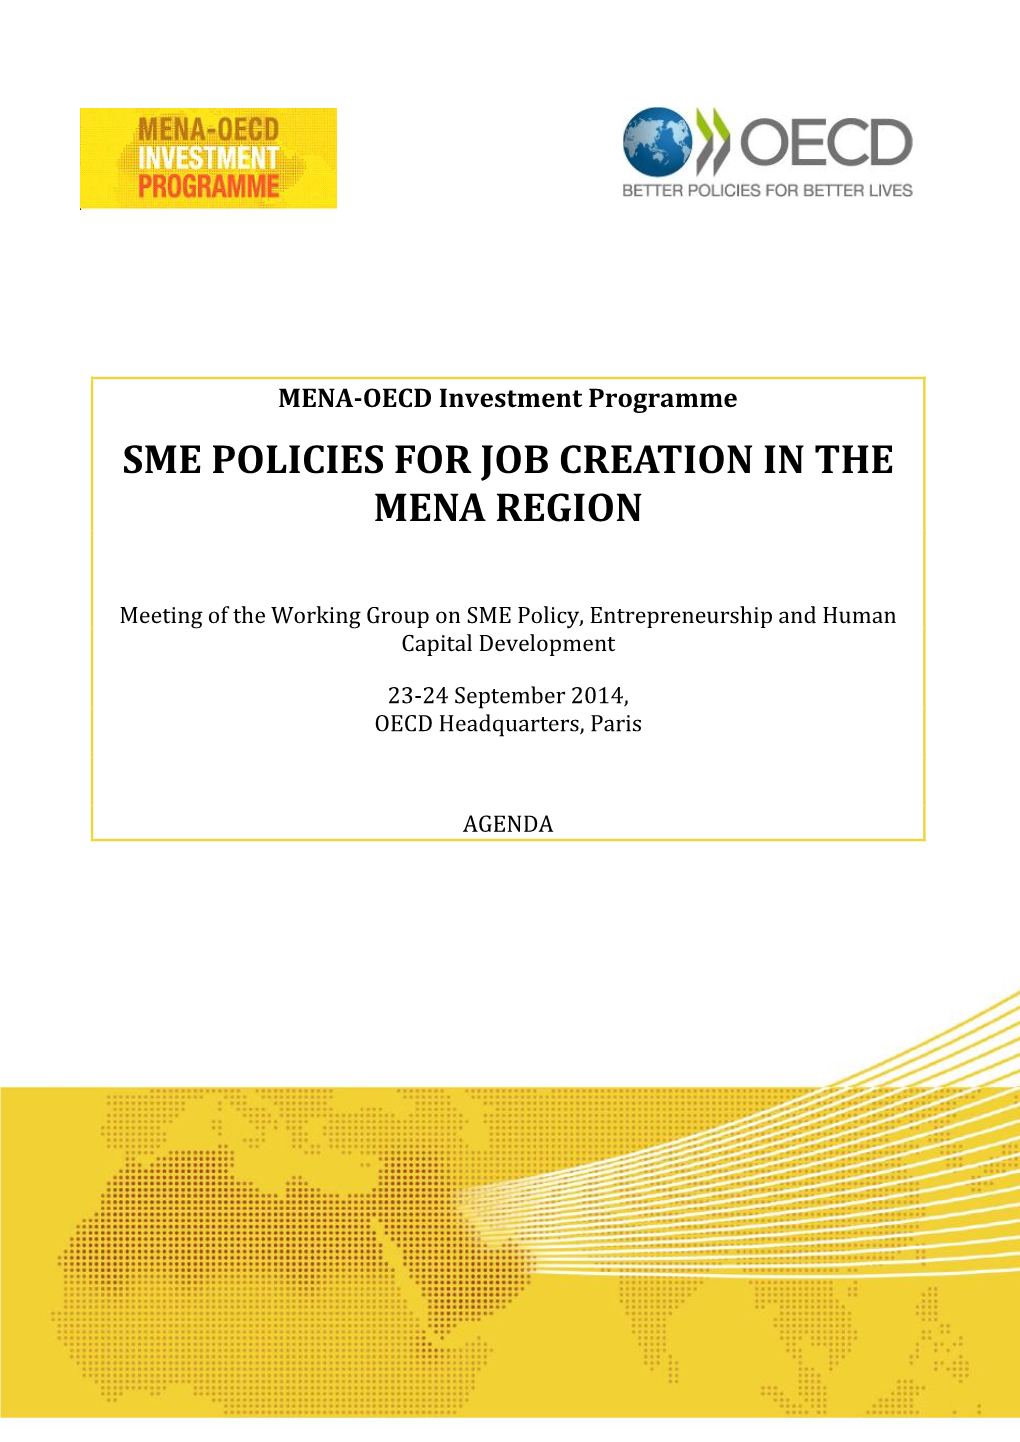 Meeting of the MENA-OECD Working Group on SME Policy, Entrepreneurship and Human Capital Development